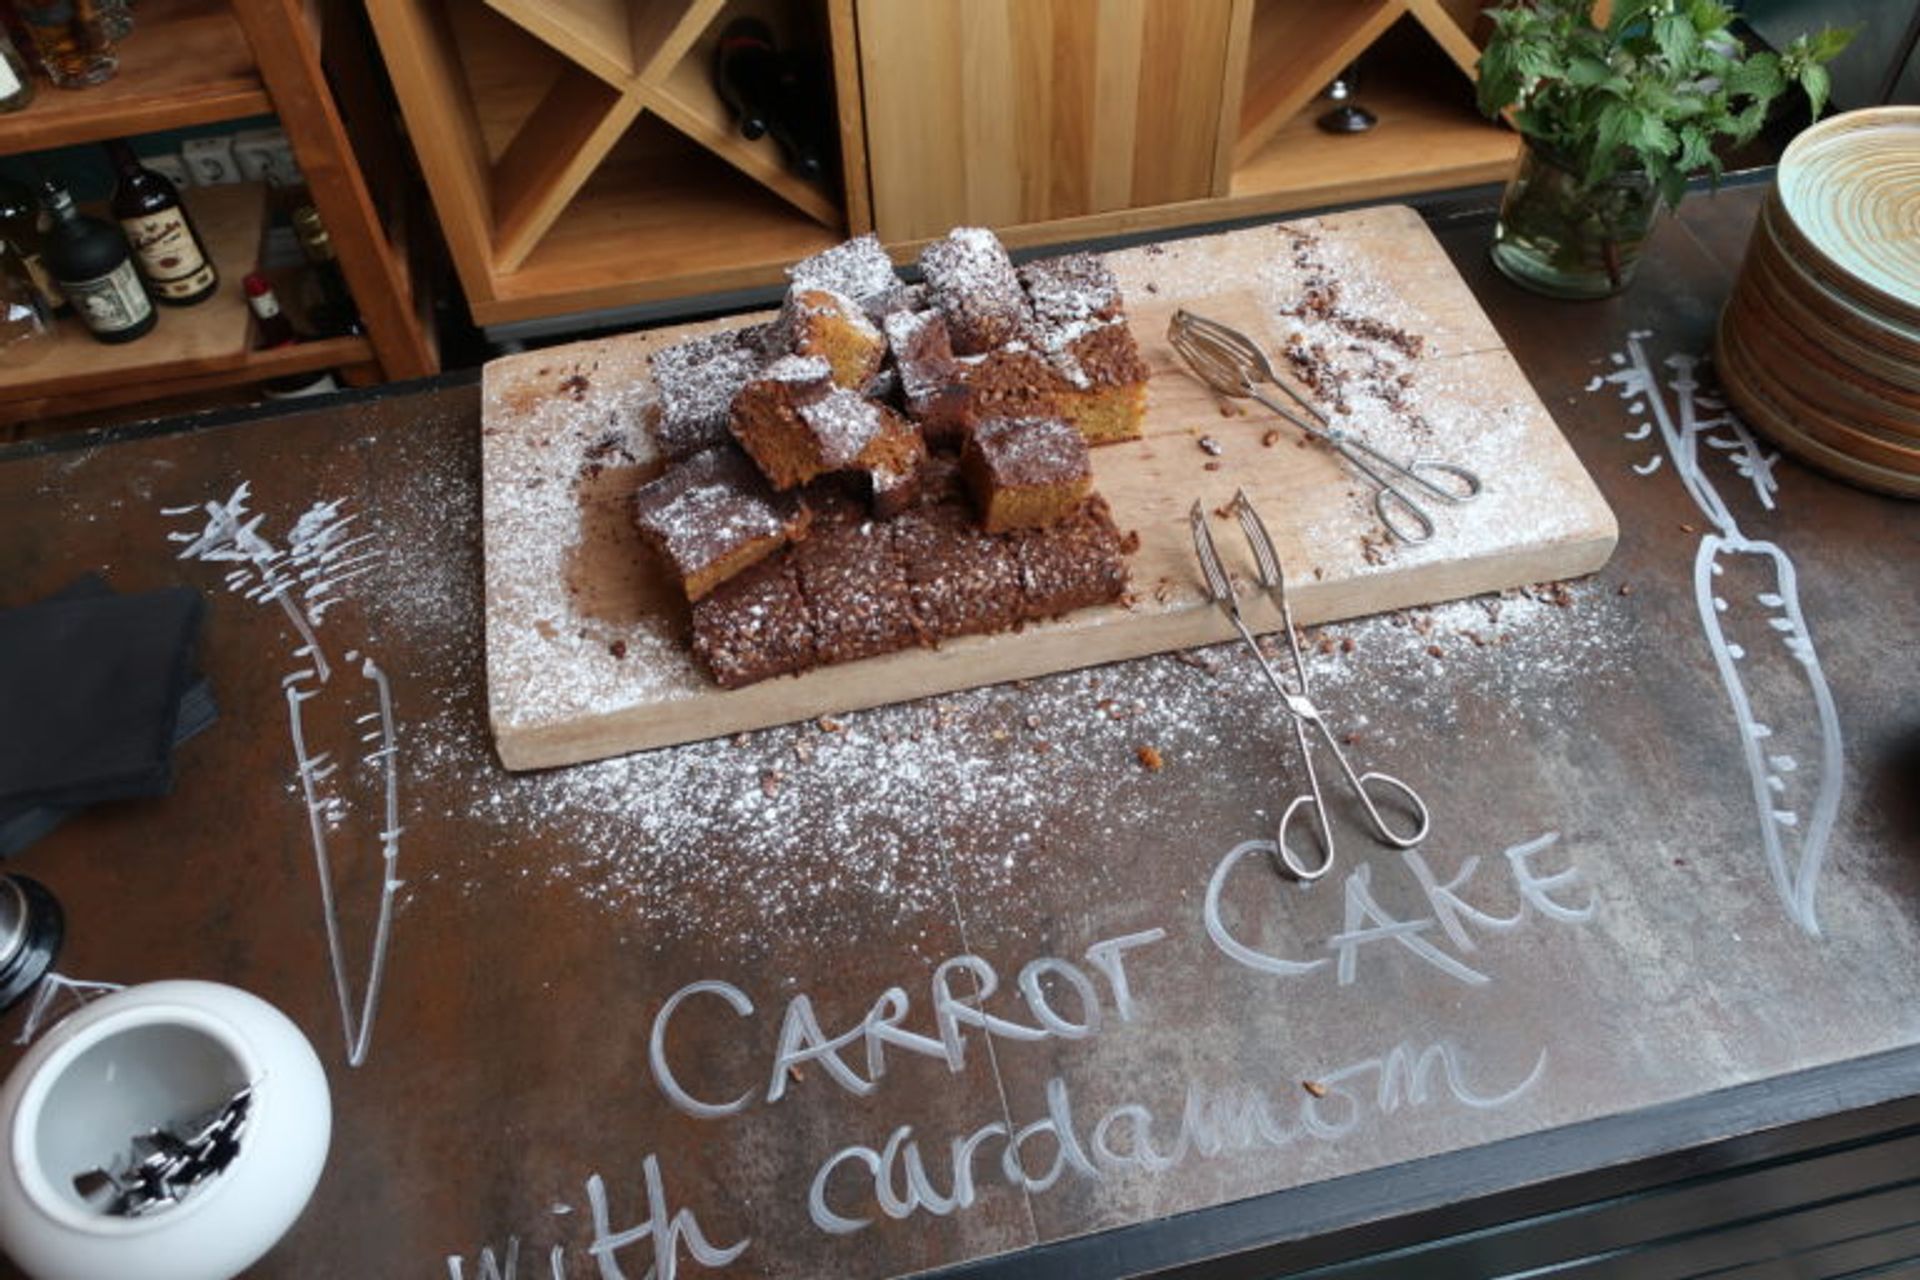 Fika bread on a brown table. It is written "Carrot cake with cardamon" and two carrots, with a white pencil on the table.